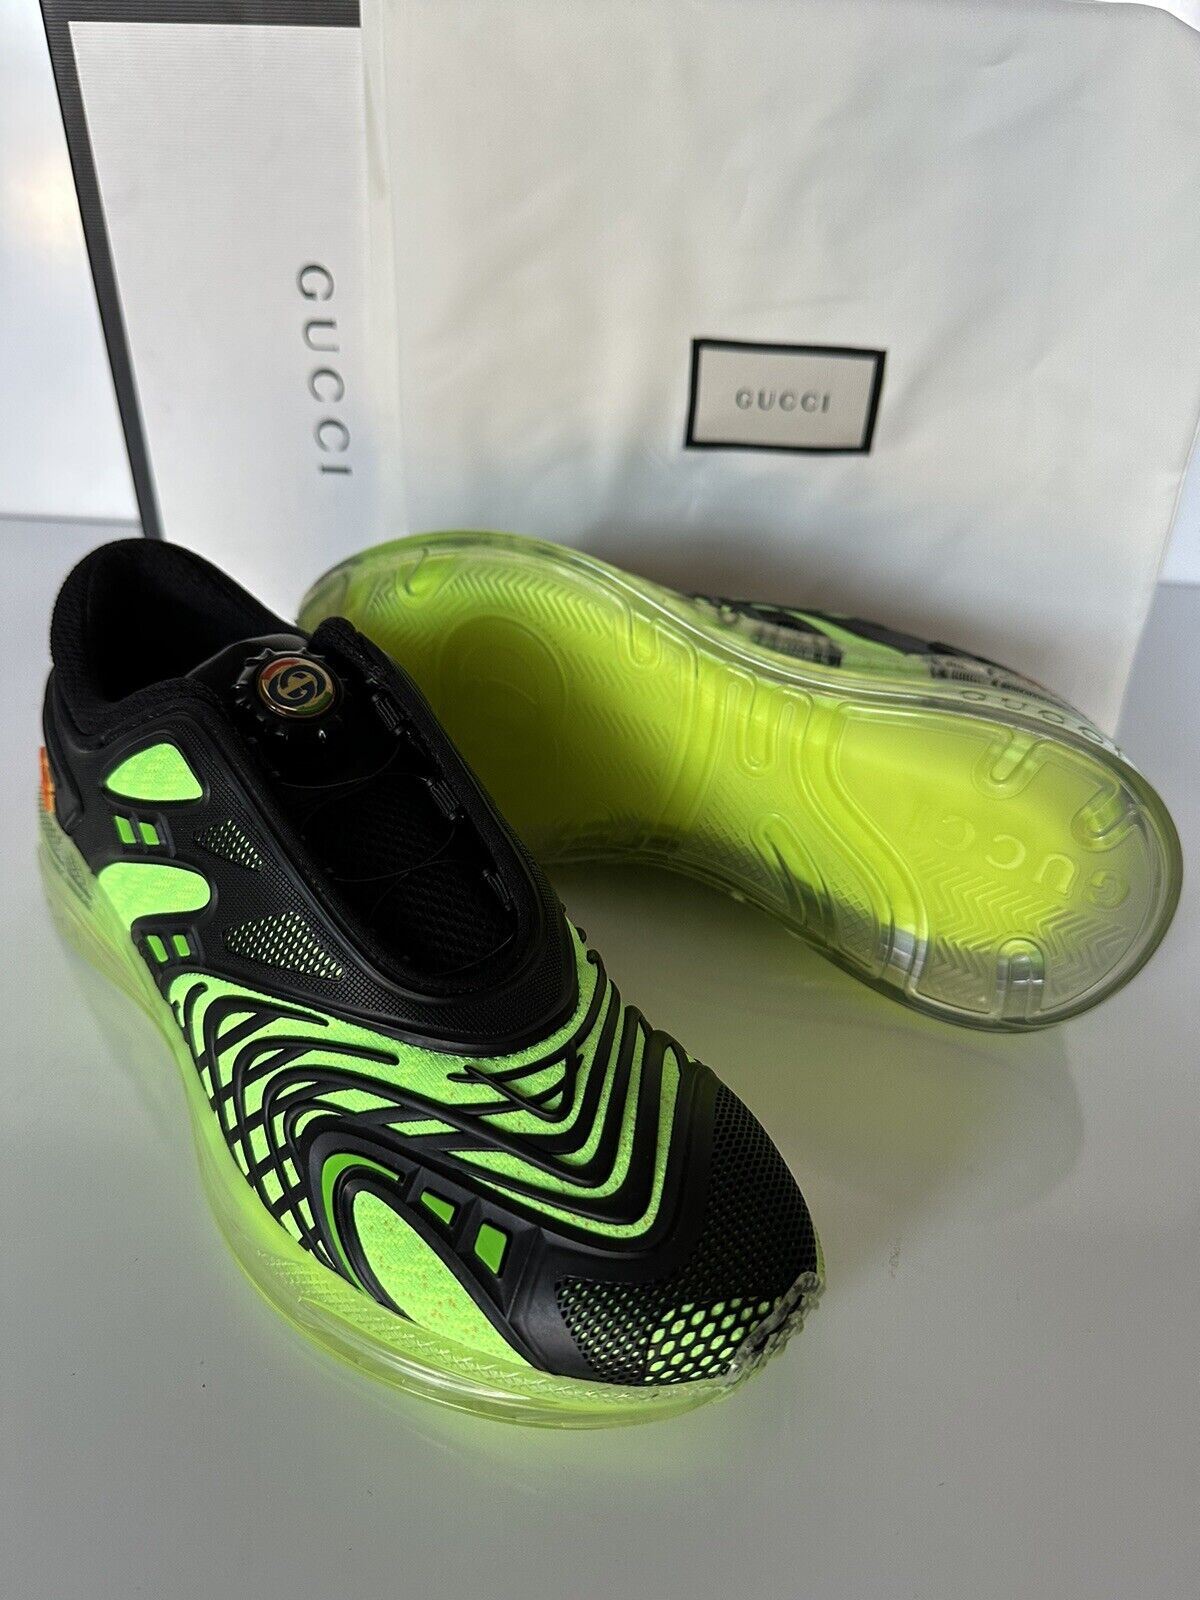 NIB Gucci Ultrapace R Sneakers In Black and Green 8.5 US (Gucci 8) 620337 IT